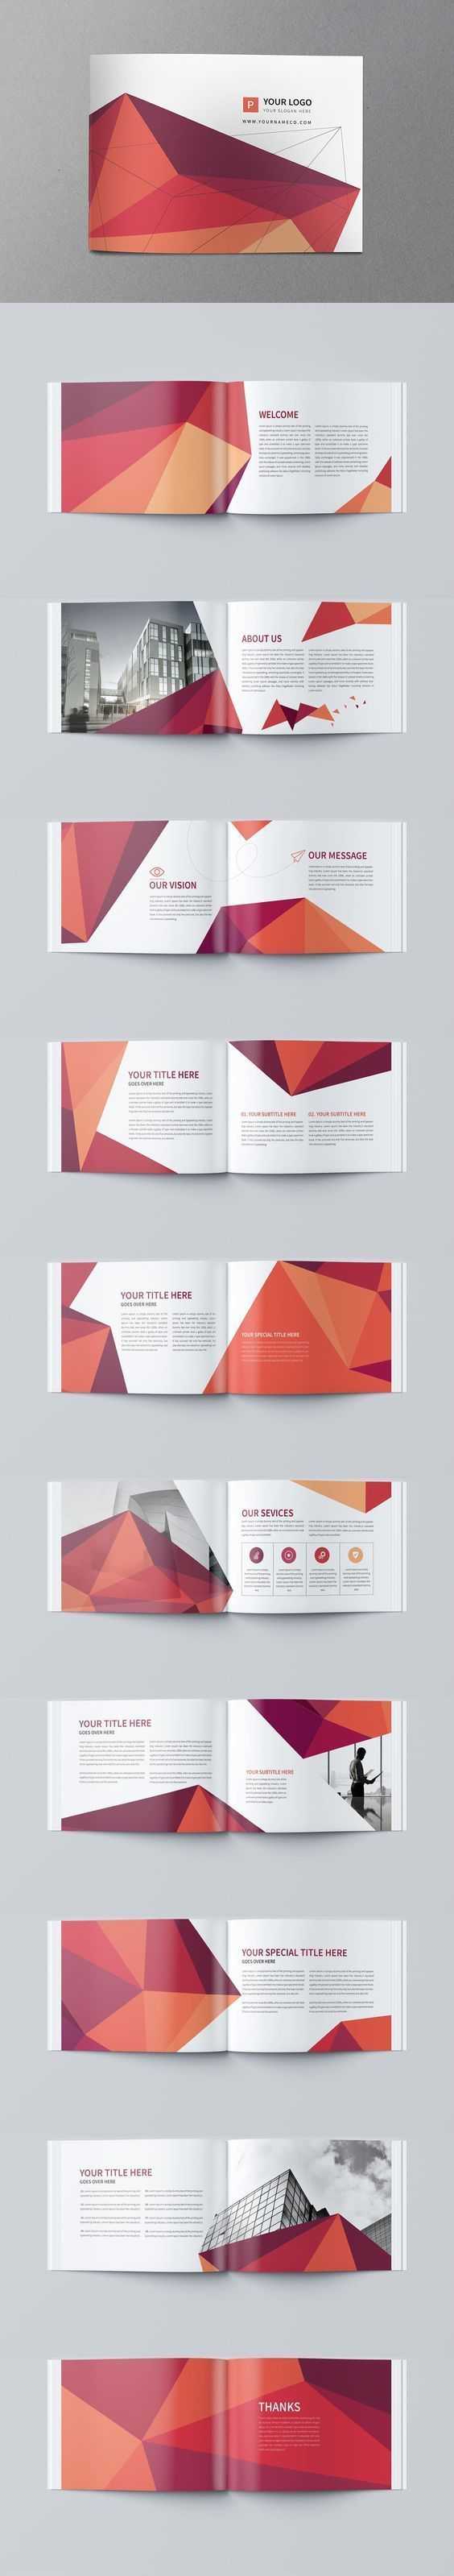 2534 Architecture Brochure Template – 43+ Free Psd, Pdf, Eps With Regard To Architecture Brochure Templates Free Download